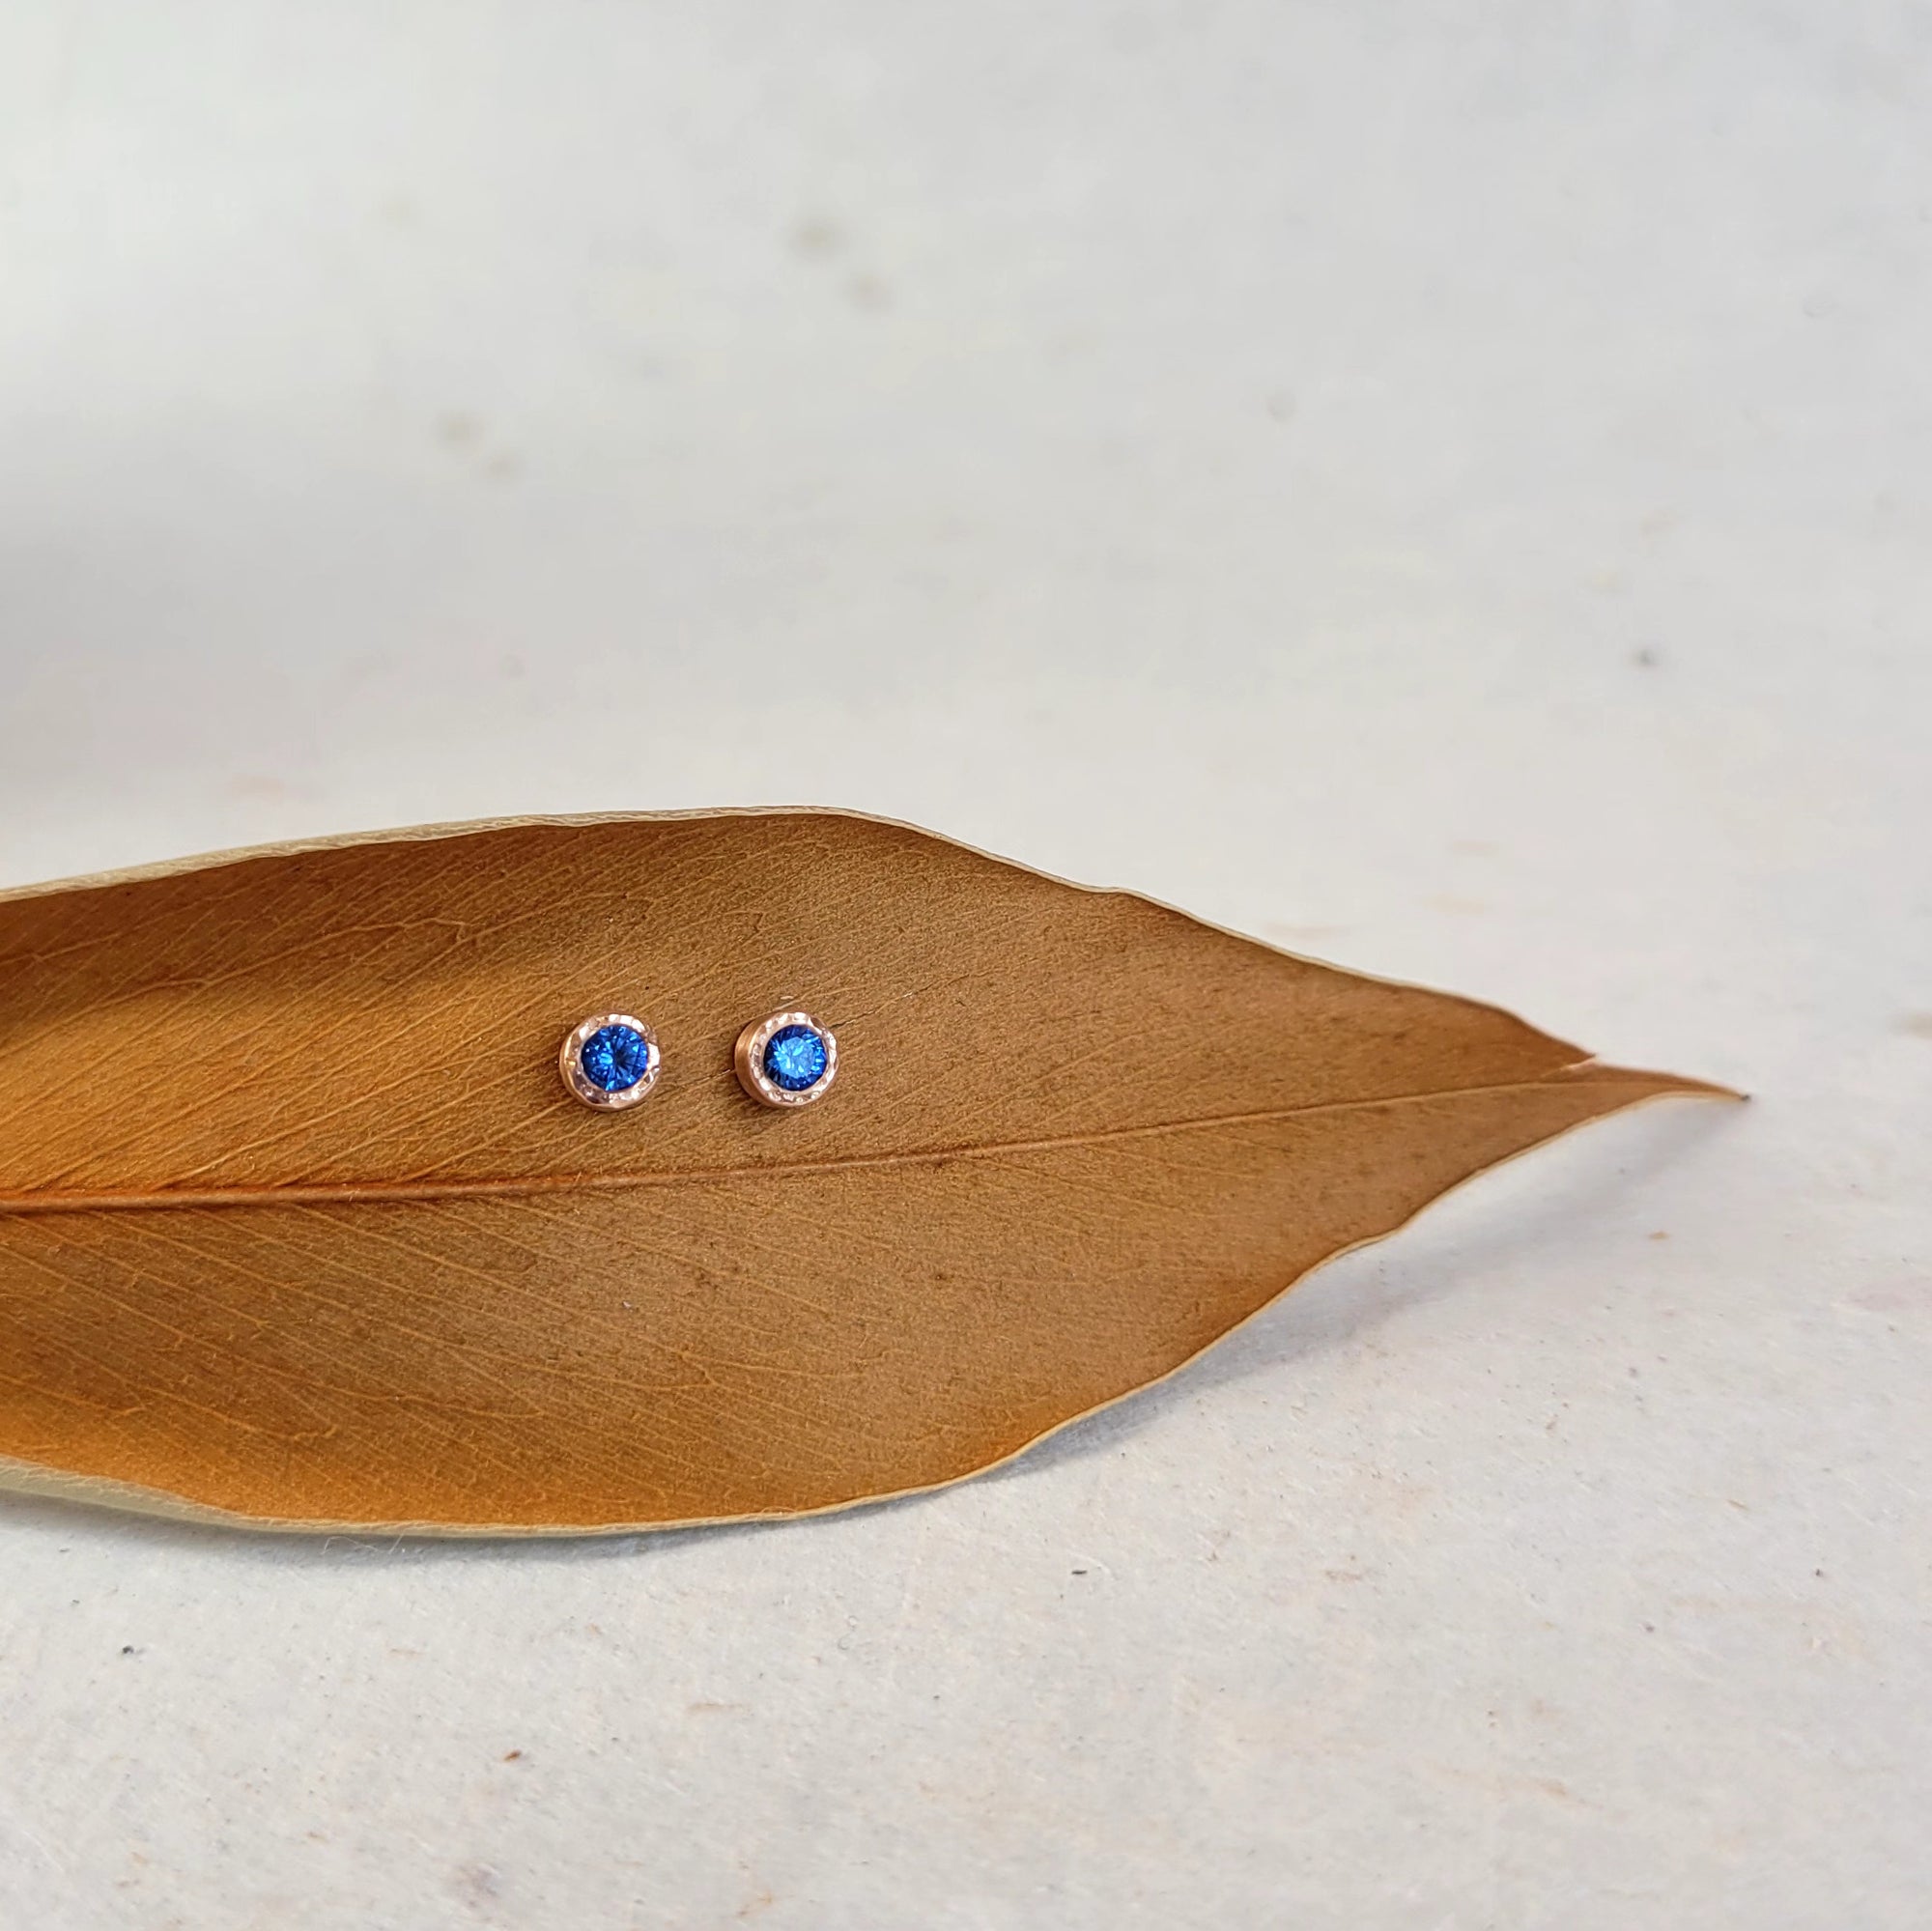 Round Brilliant Blue Sapphire Stud Earrings in Hammered Rose Gold